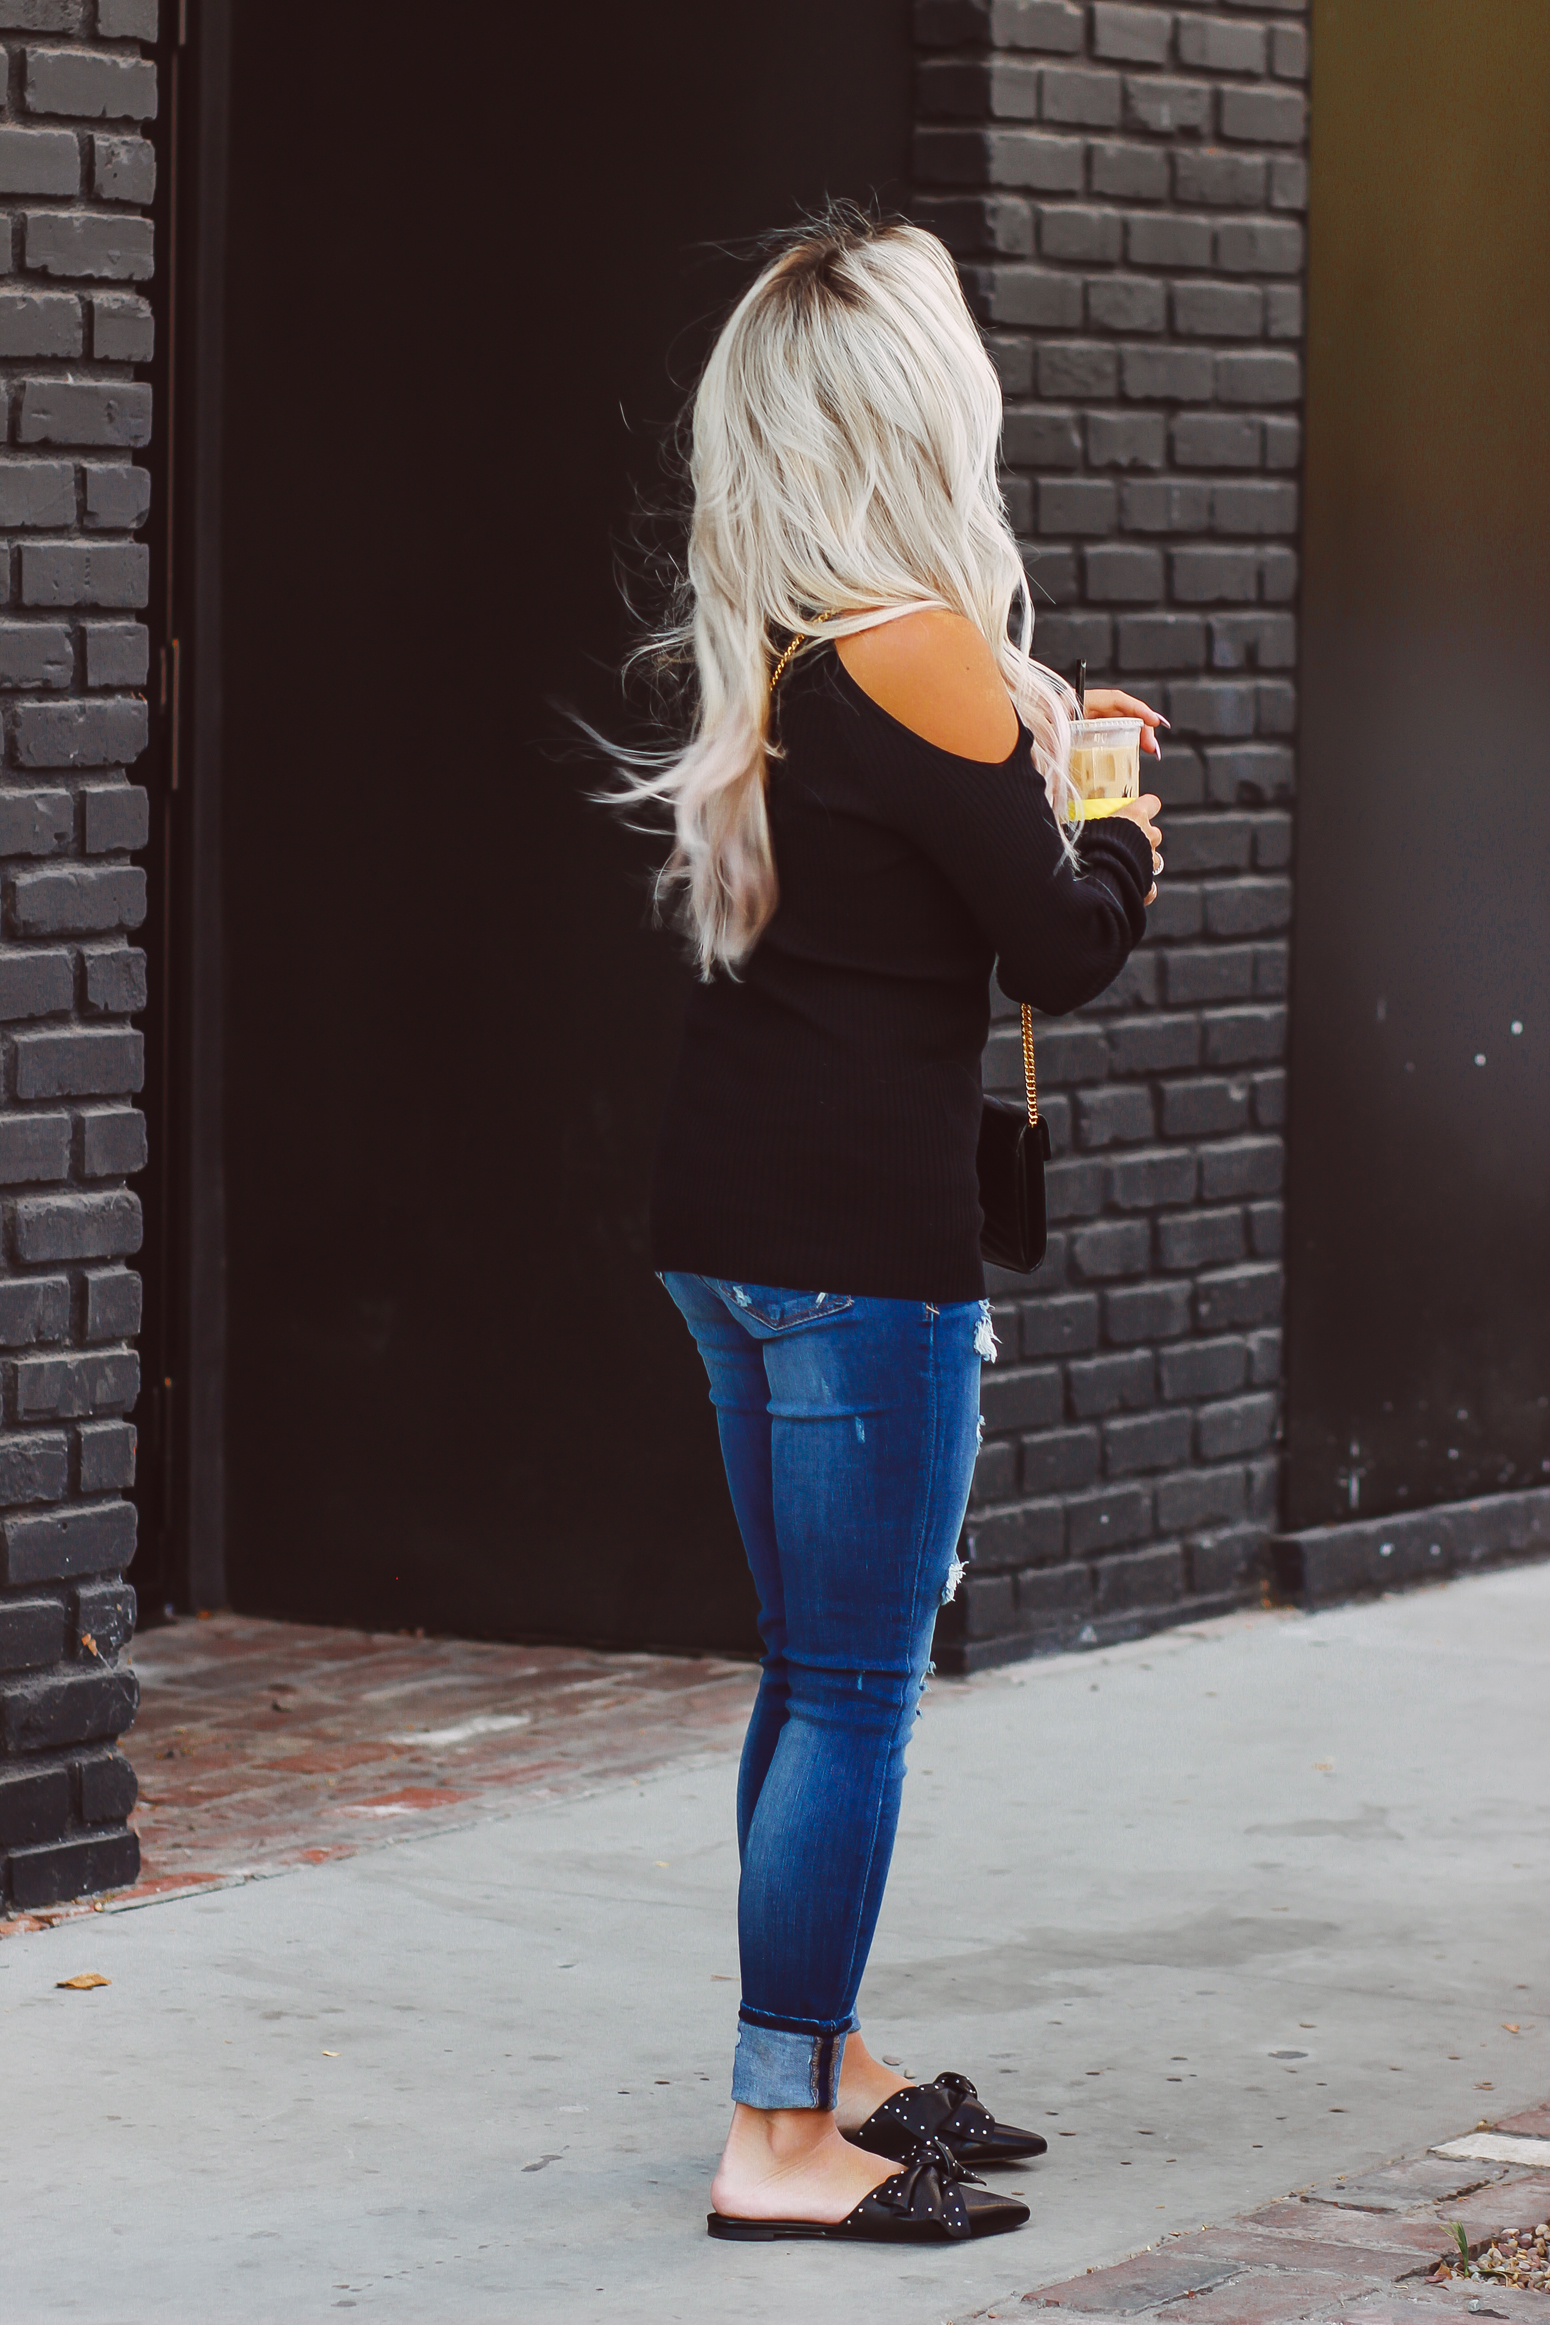 Blondie in the City | Fall Fashion Inspo | YSL | Sweater Weather